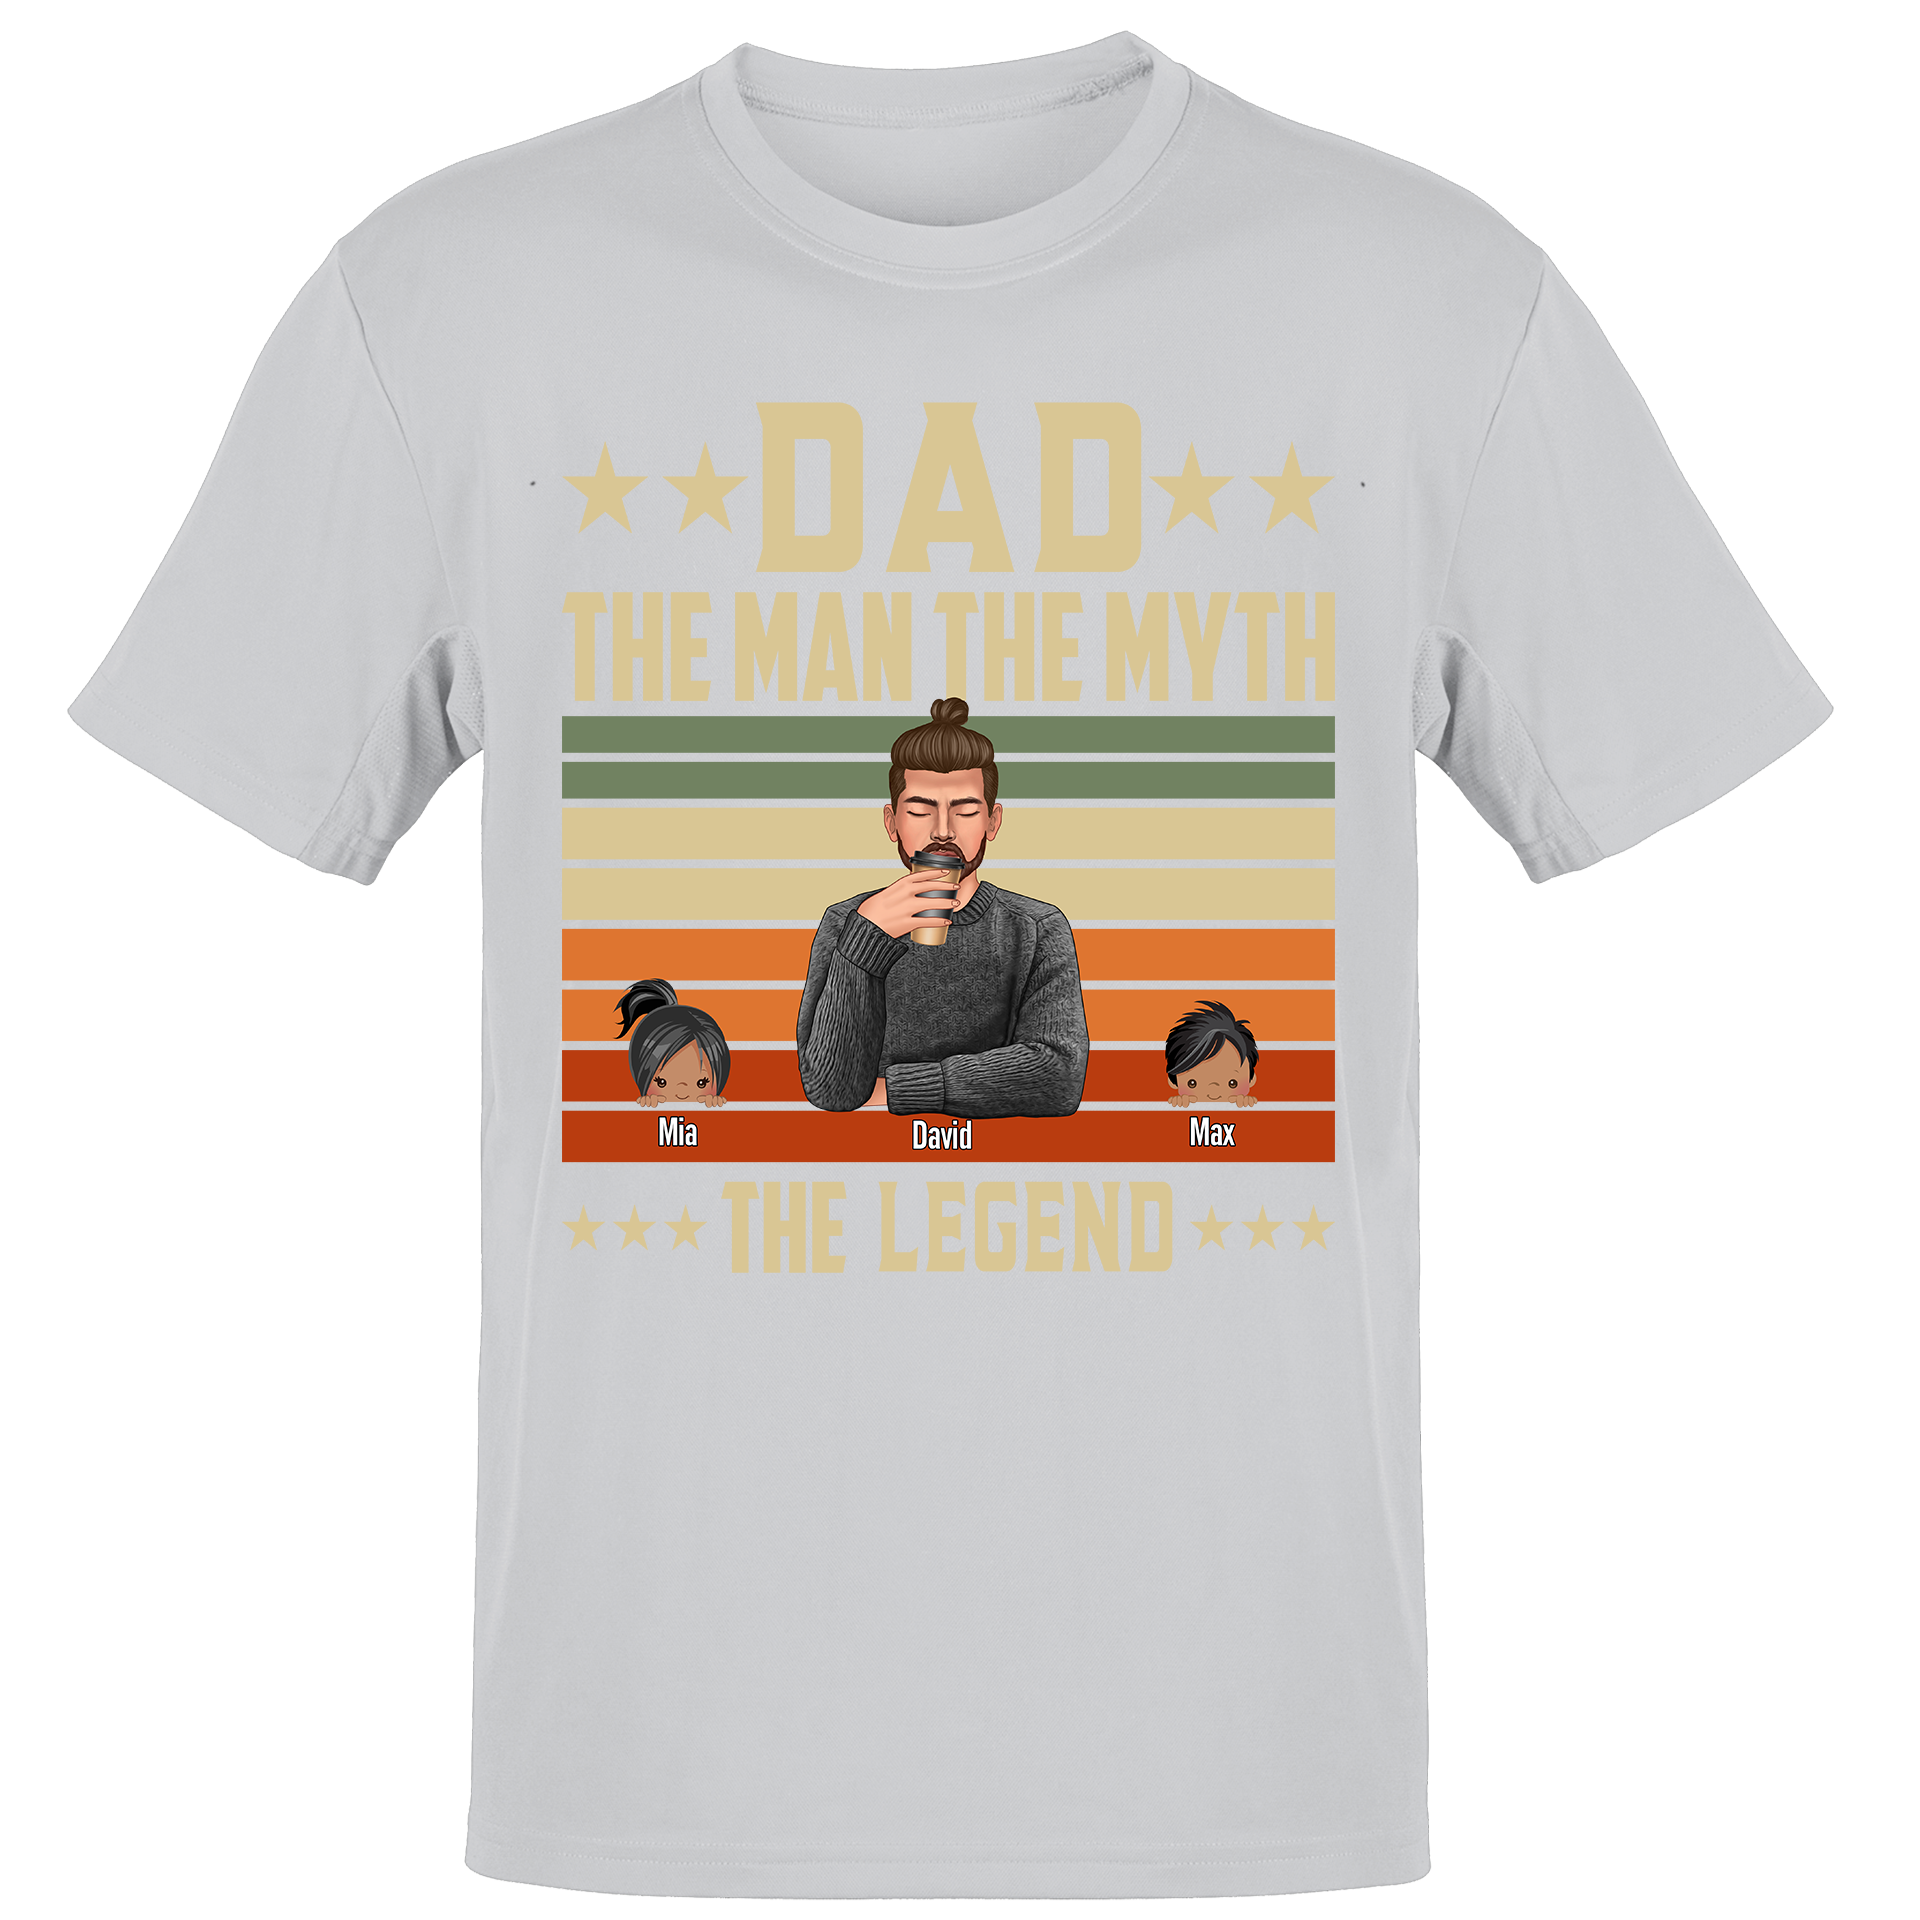 Dad the man the myth the legend - Personalized Unisex T-Shirt